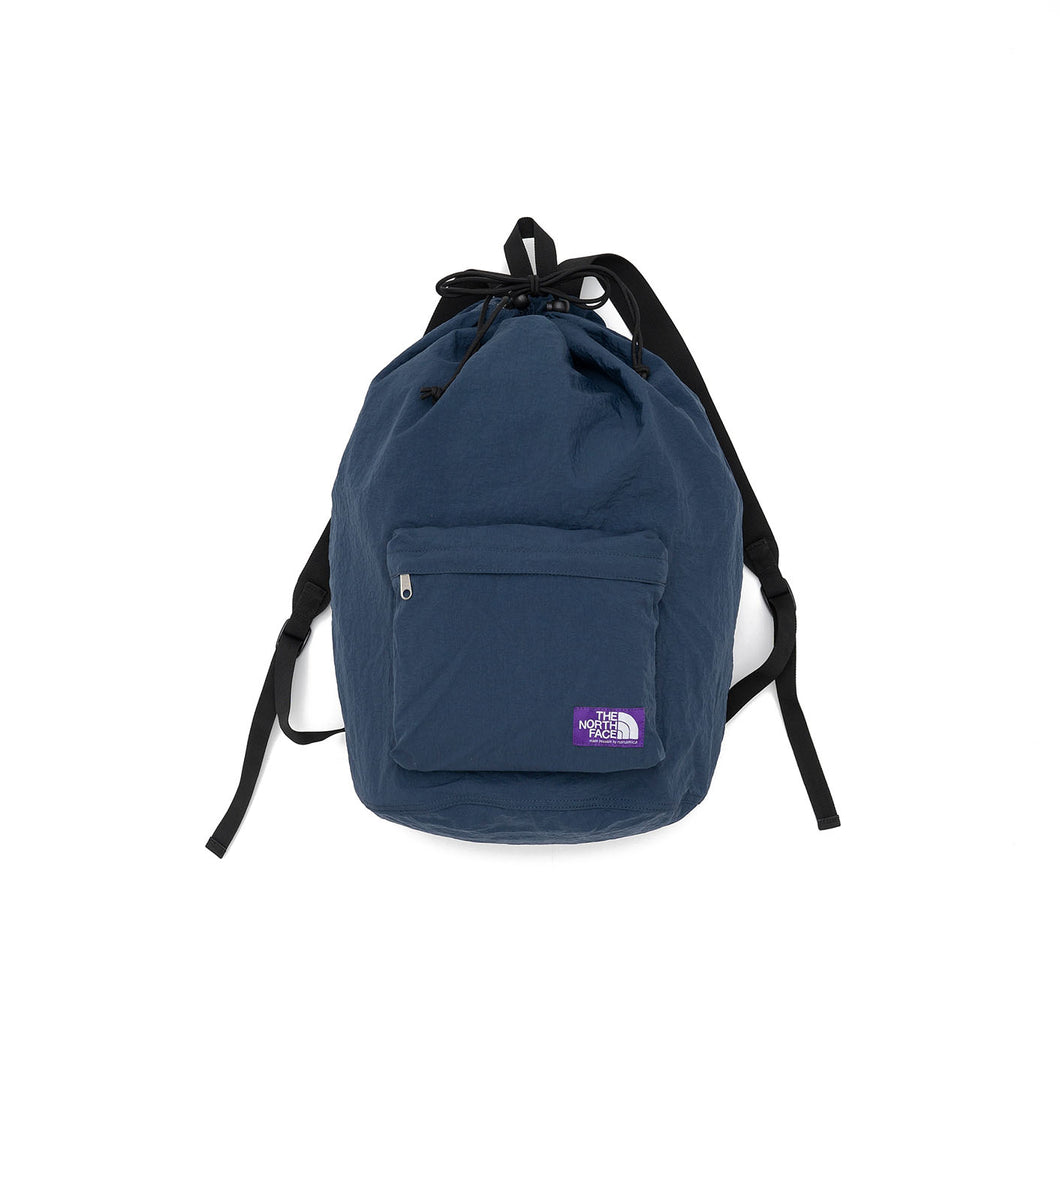 THE NORTH FACE PURPLE LABEL◇CORDURA Ripstop Knapsack/-/NVY/NN7252N-